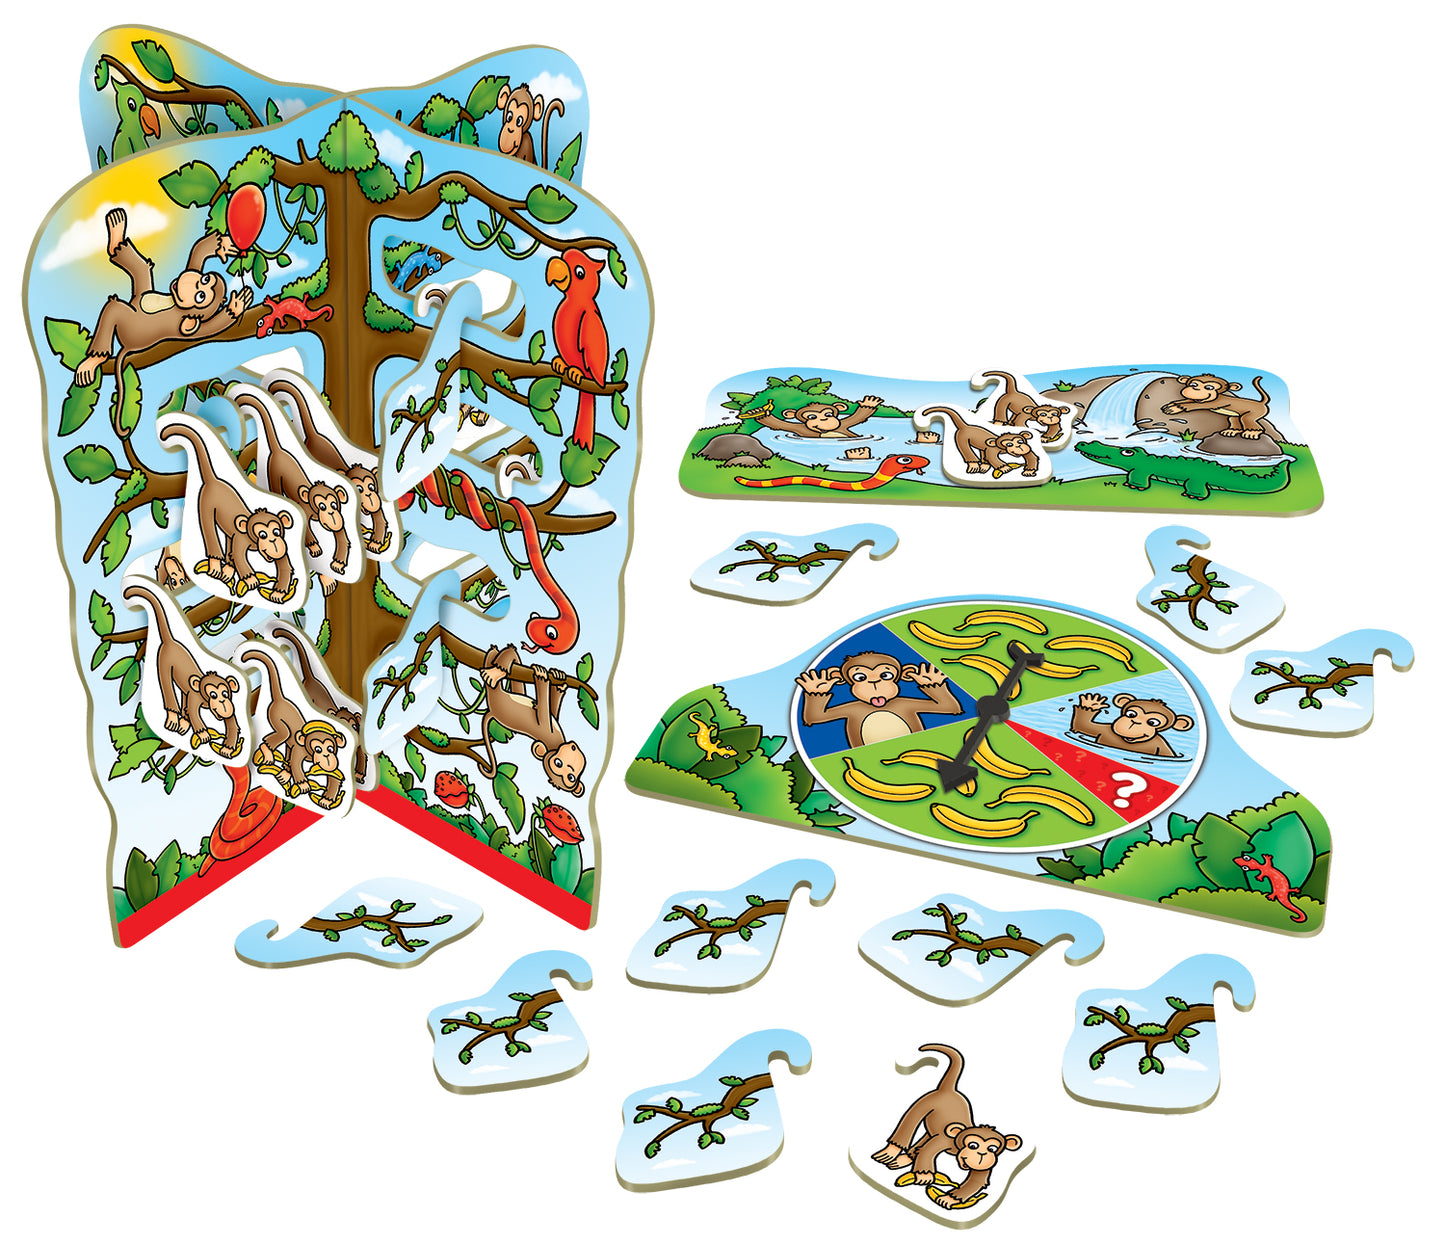 Orchard Toys Cheeky Monkeys Counting and Strategy Game